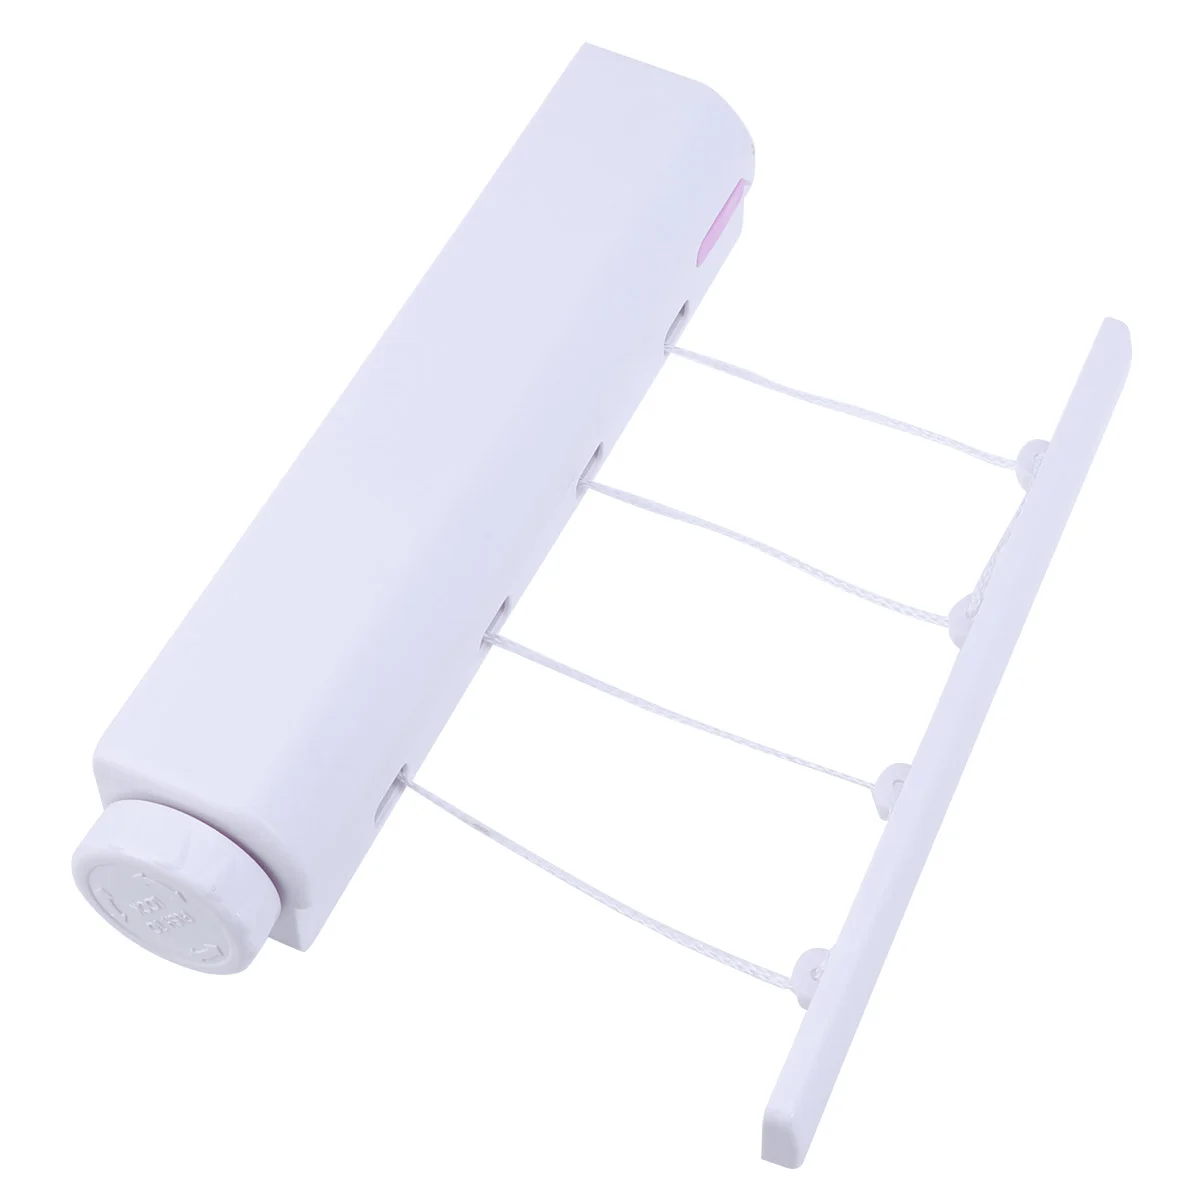 

Retractable Clothesline 4-Line Clothes Drying Rack Portable Laundry Dryer for Indoor and Outdoor Use (Random Color) Collapsible